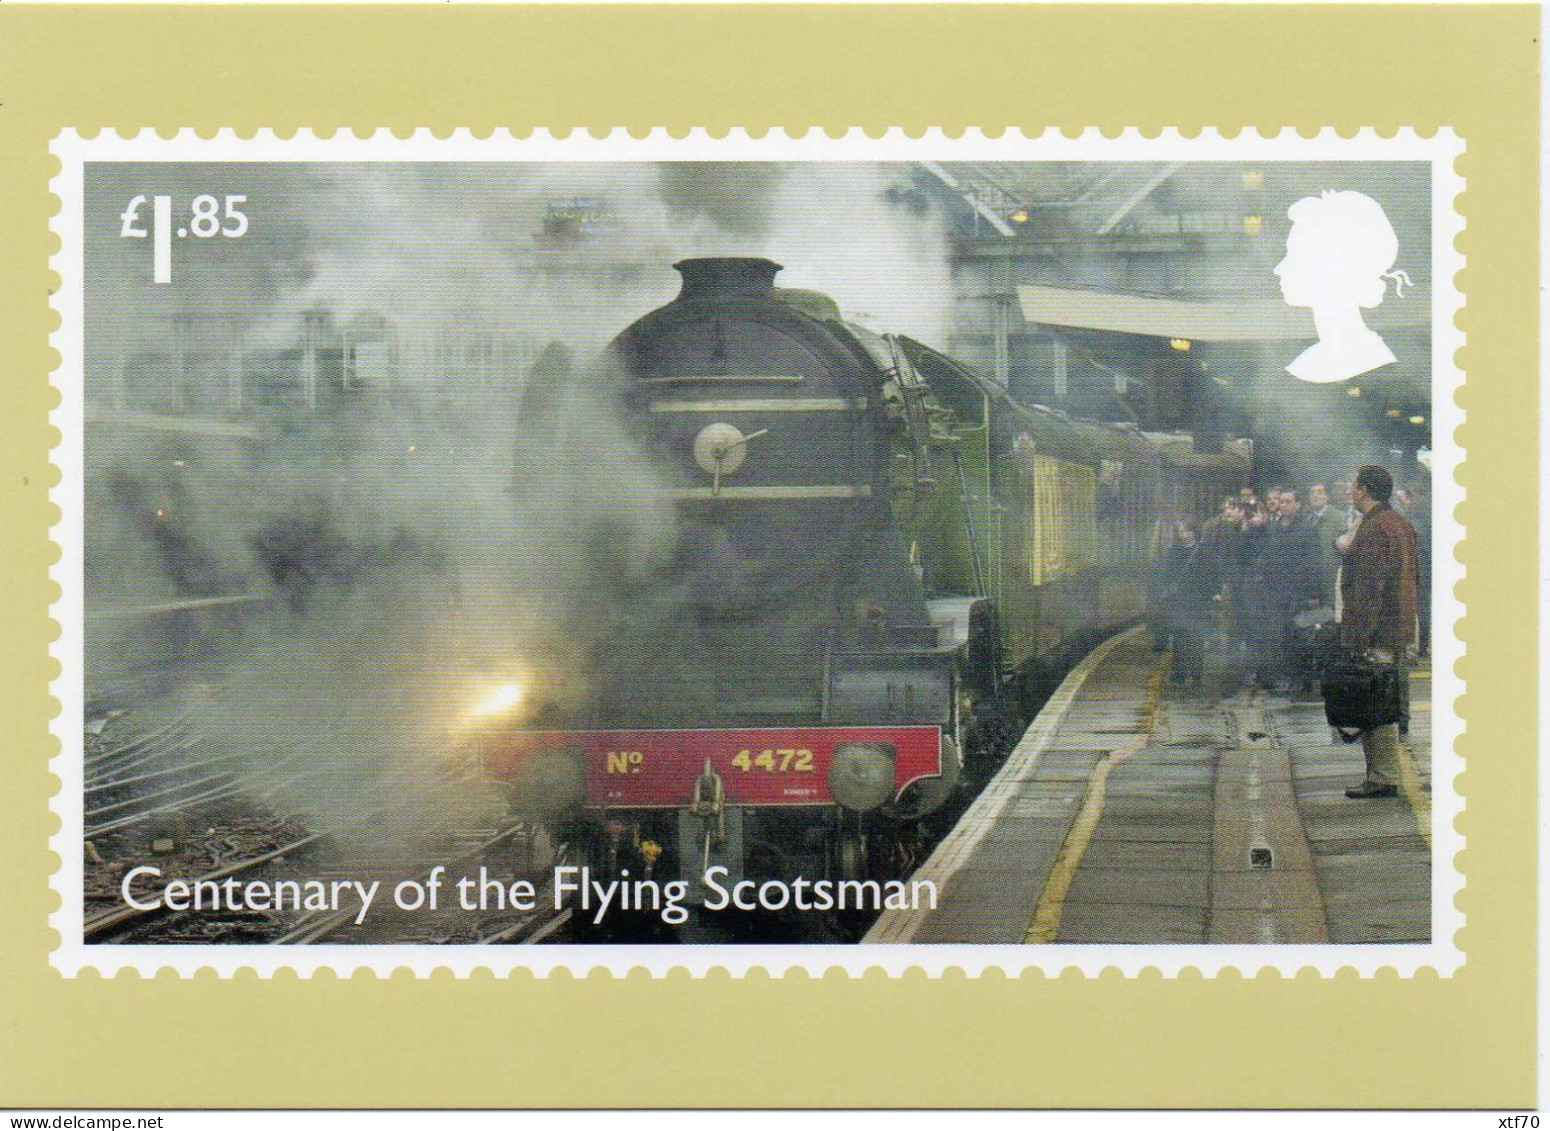 GREAT BRITAIN 2023 Centenary of the Flying Scotsman mint PHQ cards